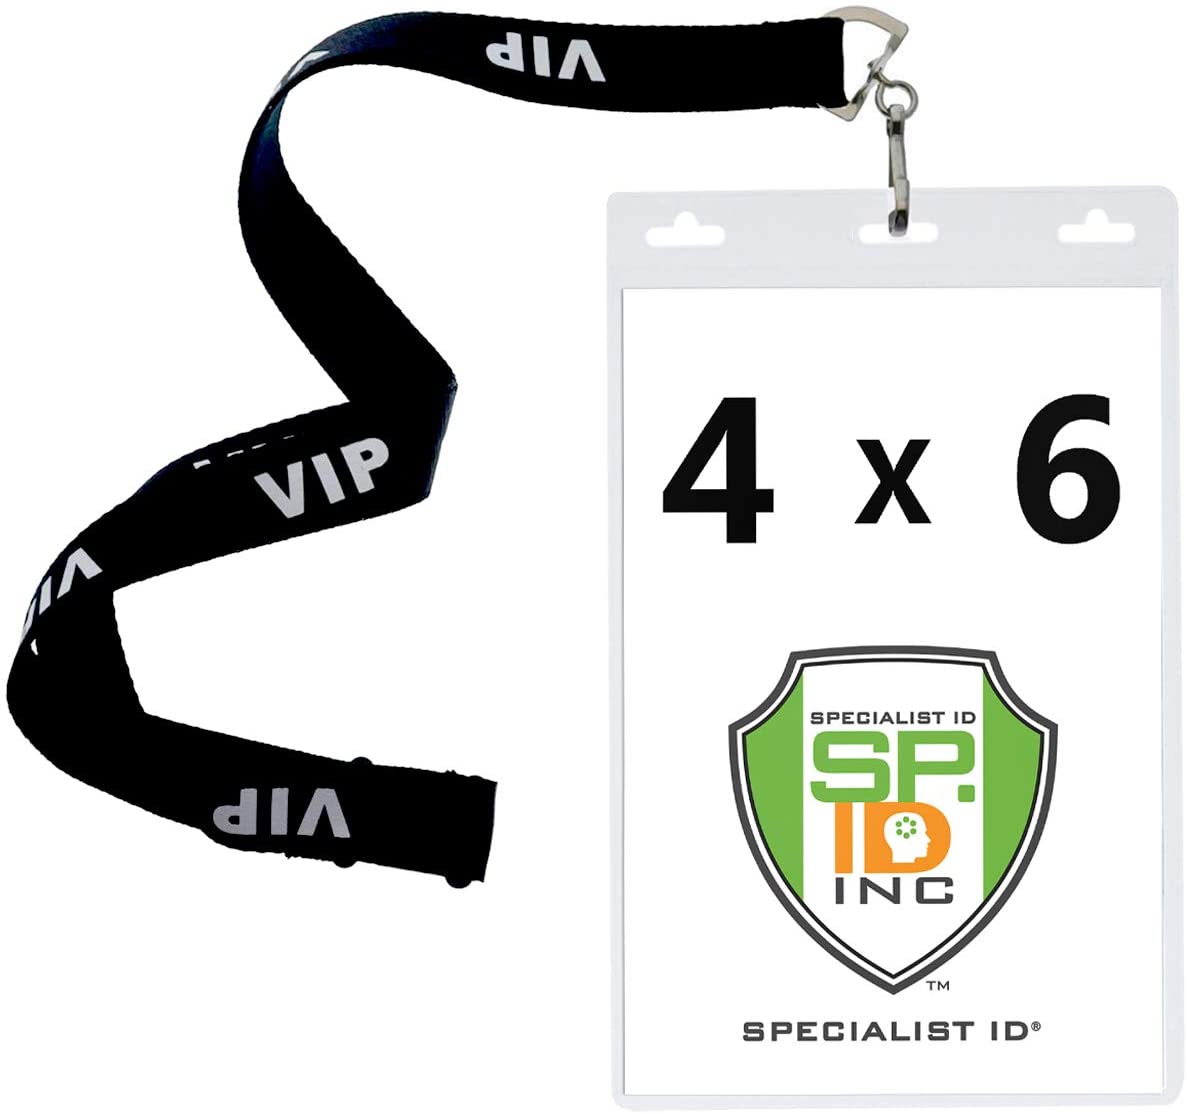 Lanyard with 'VIP' text attached to a Vertical Oversized 4X6 Vinyl ID Badge Holder (XL46V) displaying '4 x 6' dimensions and Specialist ID Inc logo.